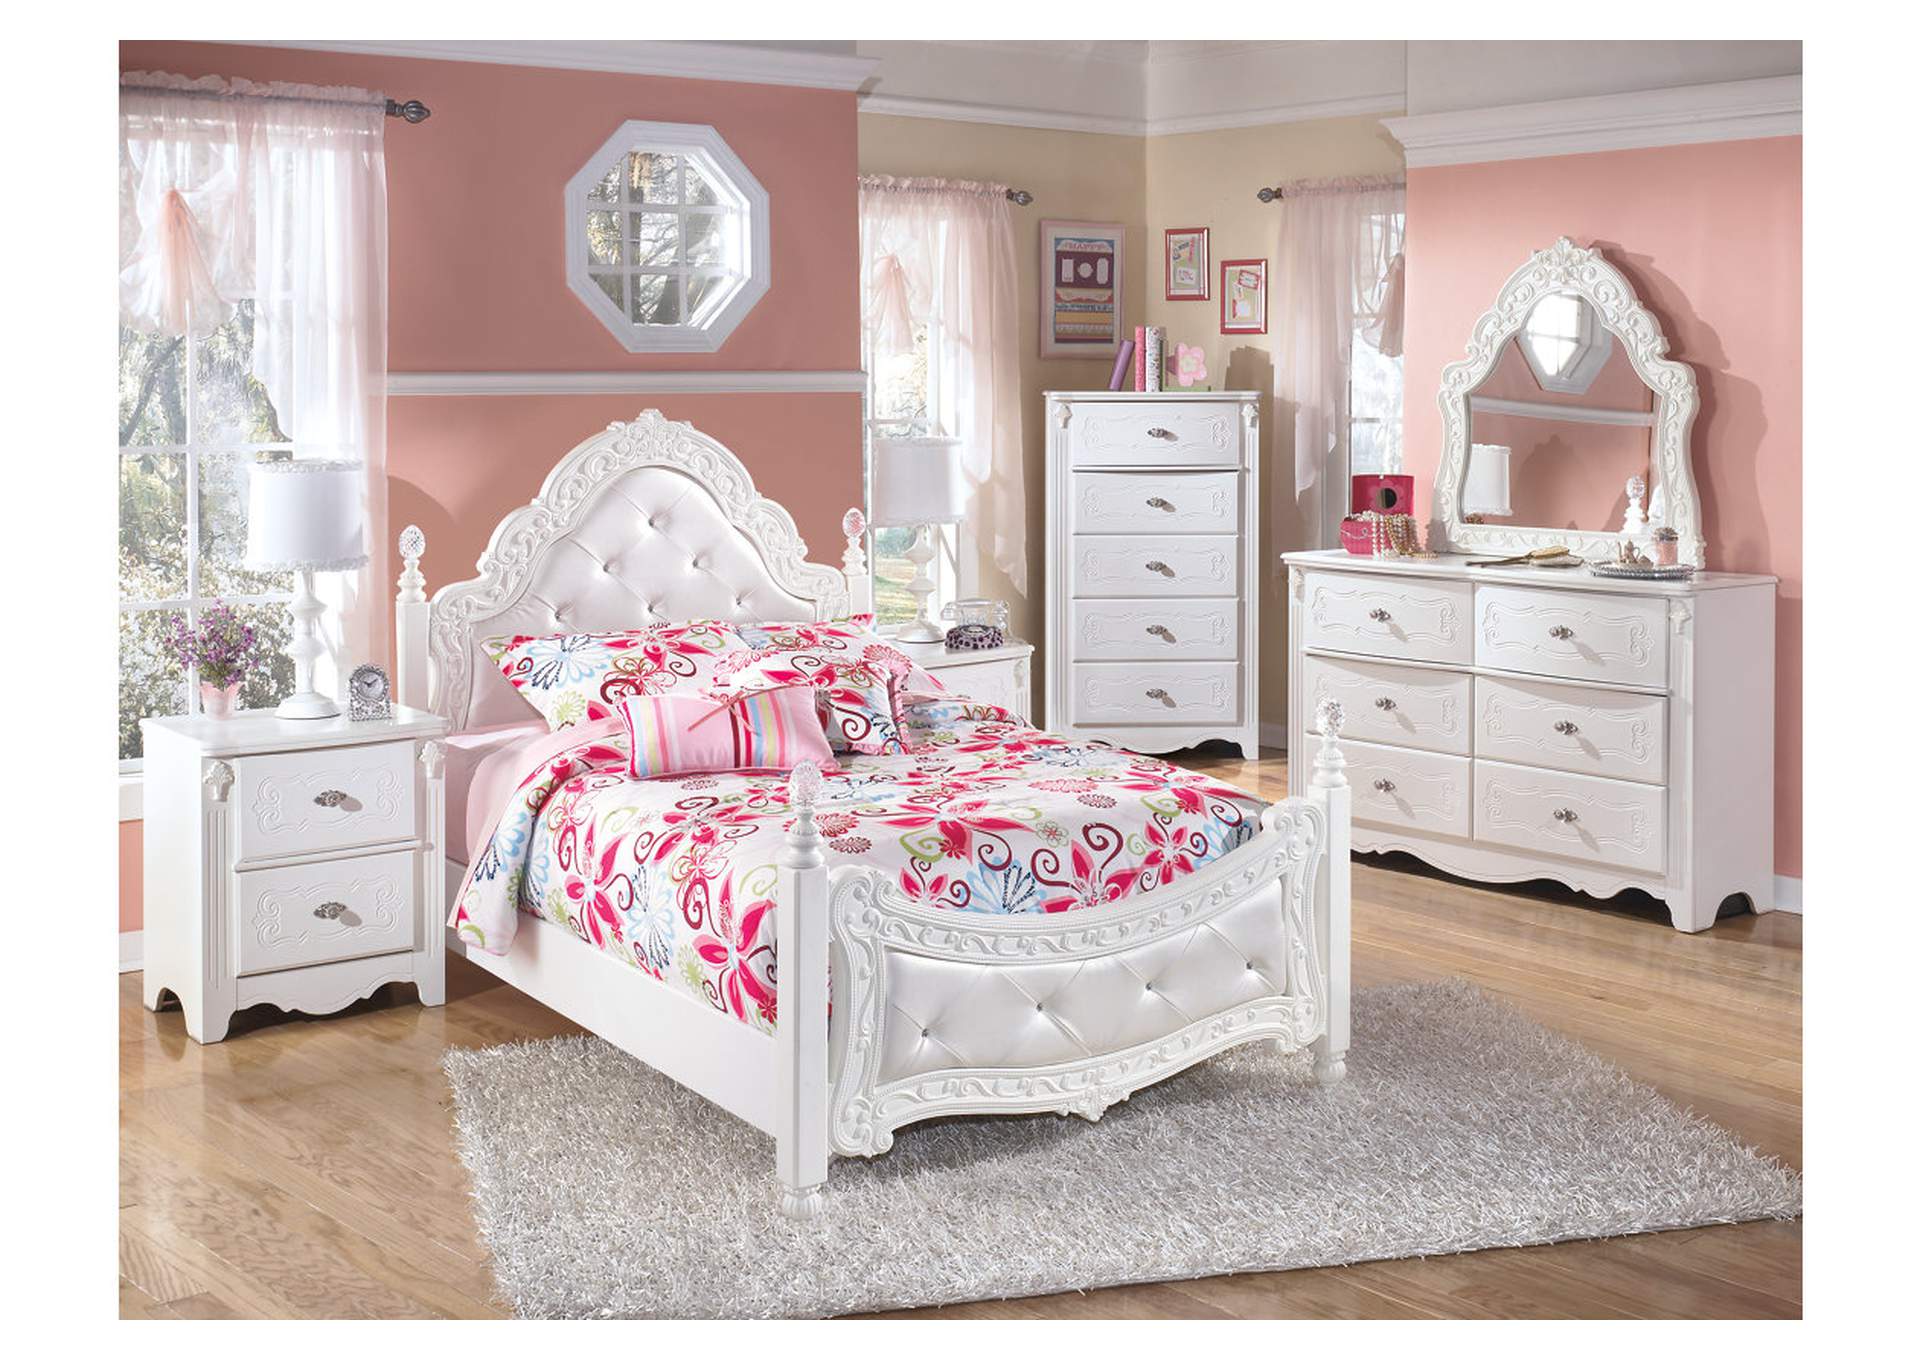 Exquisite Full Poster Bed,Signature Design By Ashley